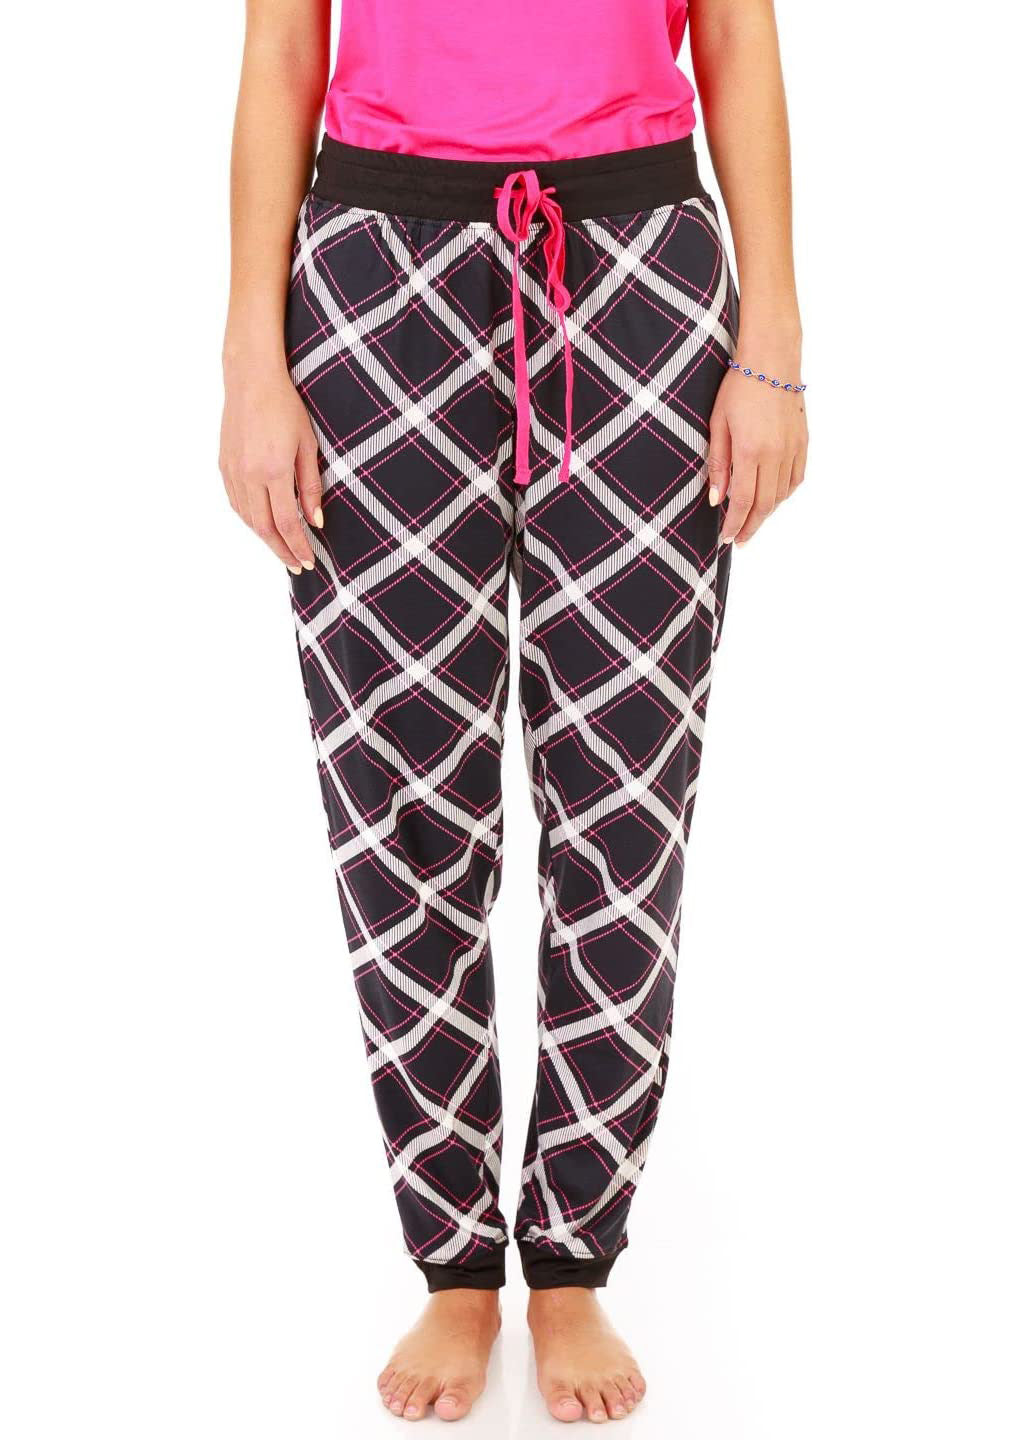 PJ joggers with soft velvety texture, stretch, elastic waistband, drawstring, and stylish ankle cuff. This pattern is a navy plaid with white and red lines.  it also features a red drawstring. If those alt-text were helpful for you, please let us know!